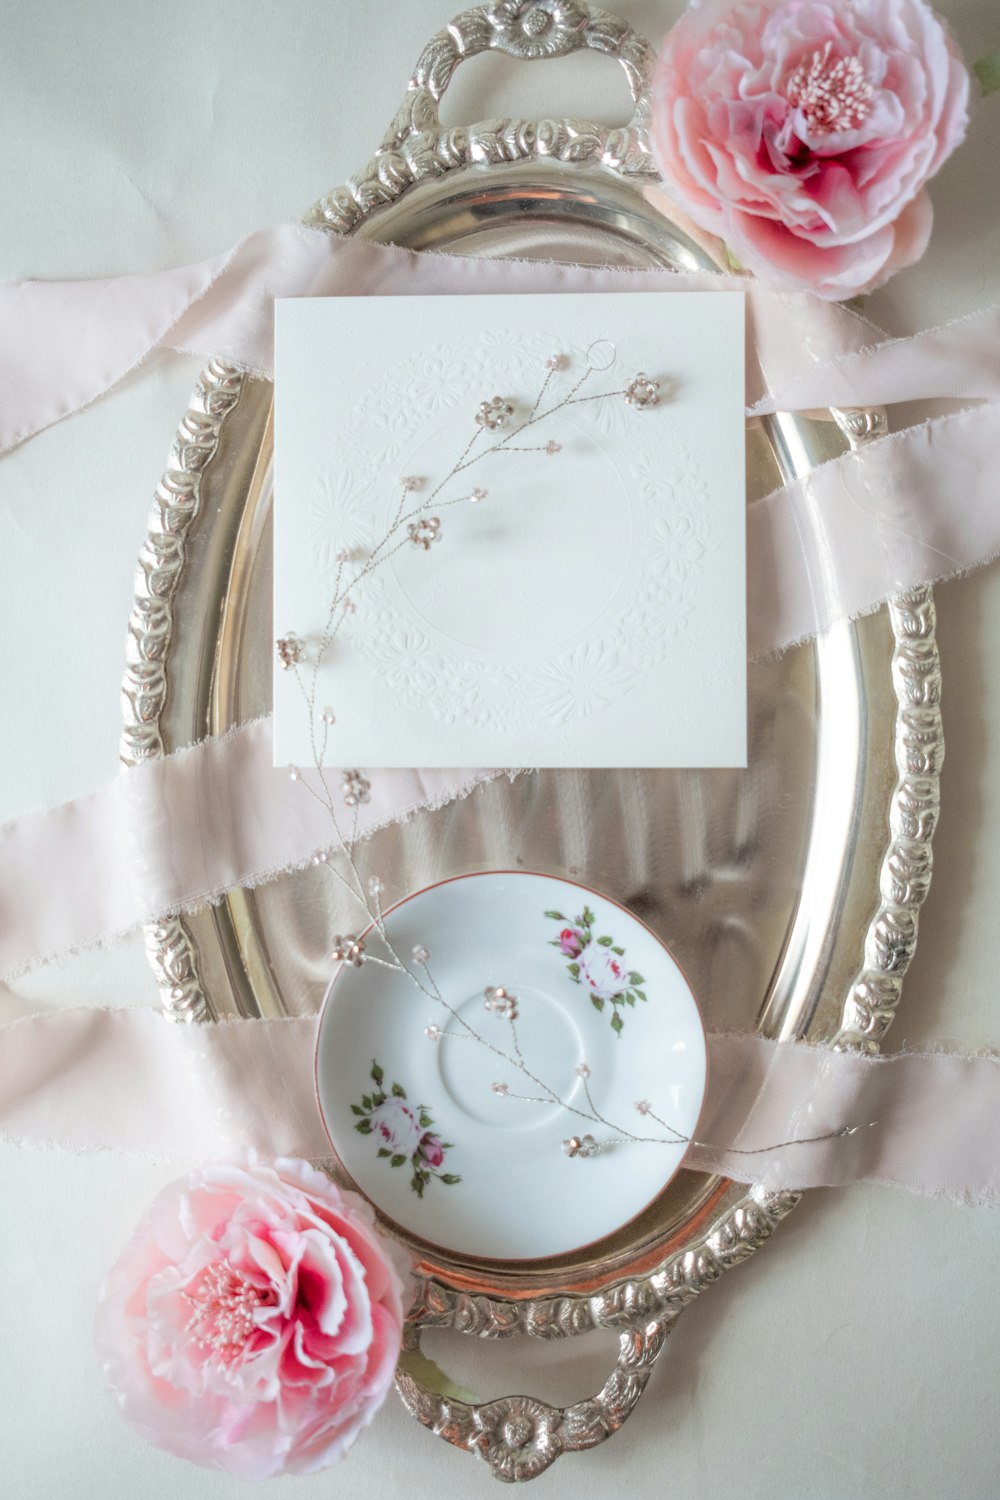 a plate with a card and some flowers on it